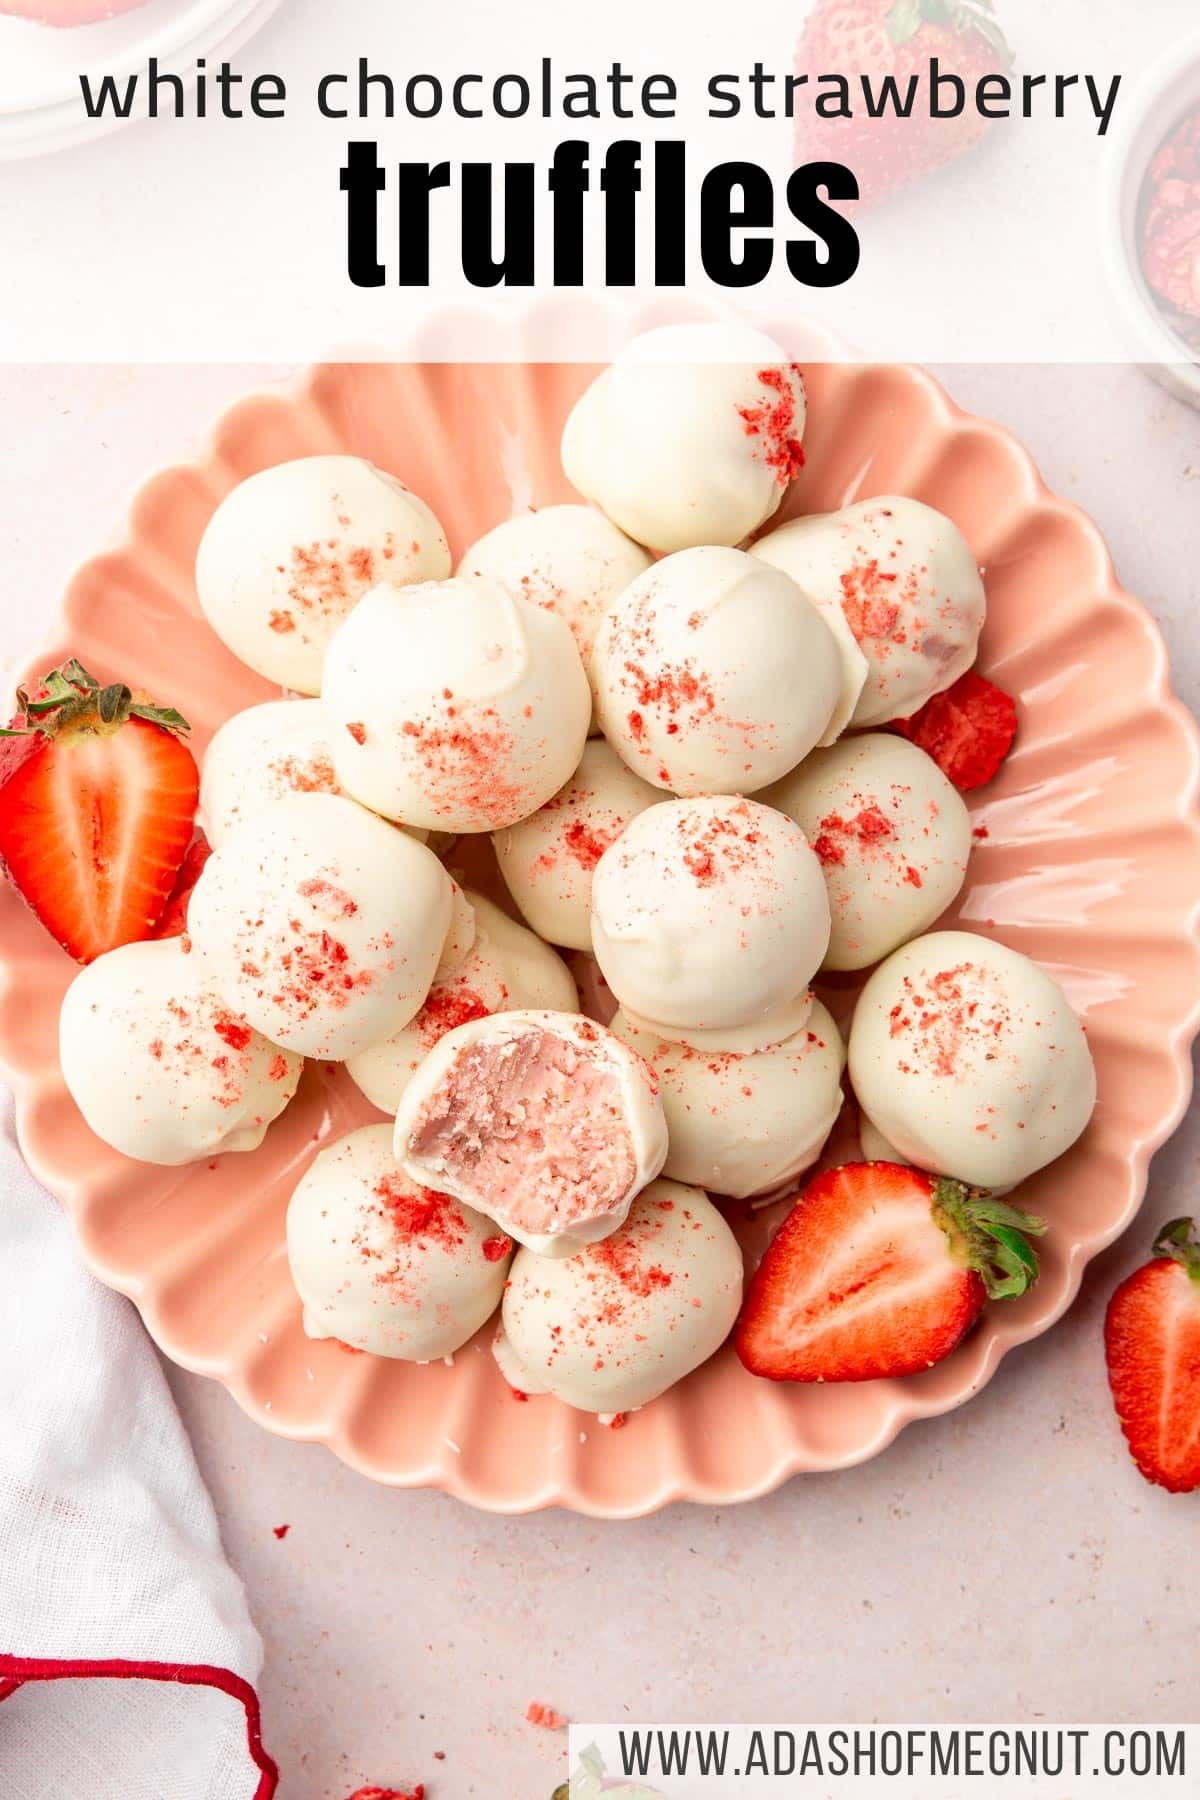 An overhead view of a pink scalloped plate with a pile of white chocolate strawberry truffles and strawberry halves on it.